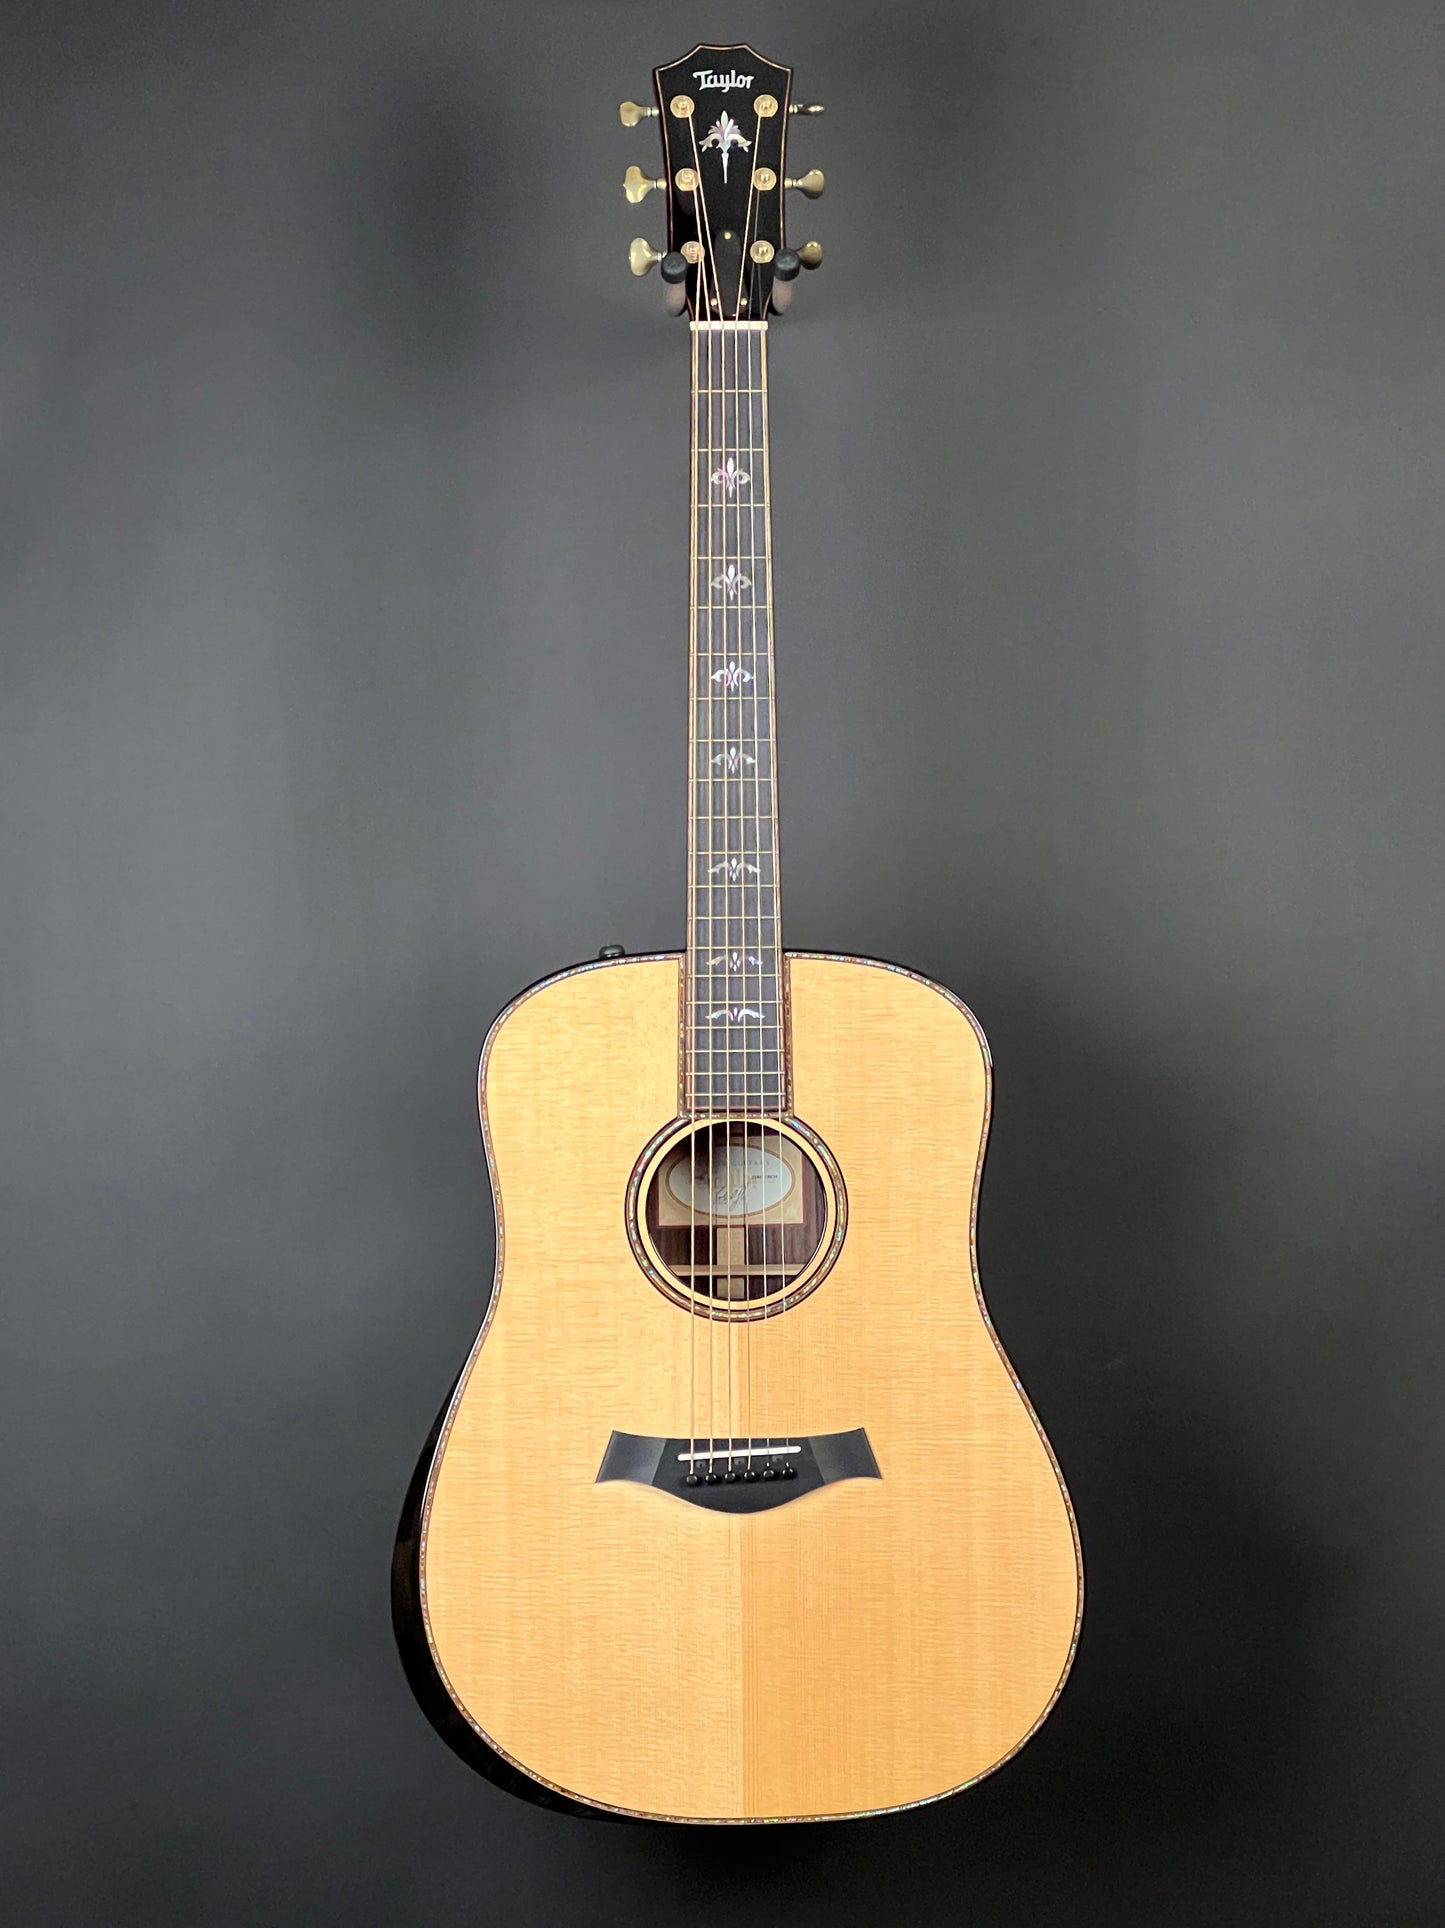 2018 Taylor 910e Acoustic Guitar with Electronics - Used